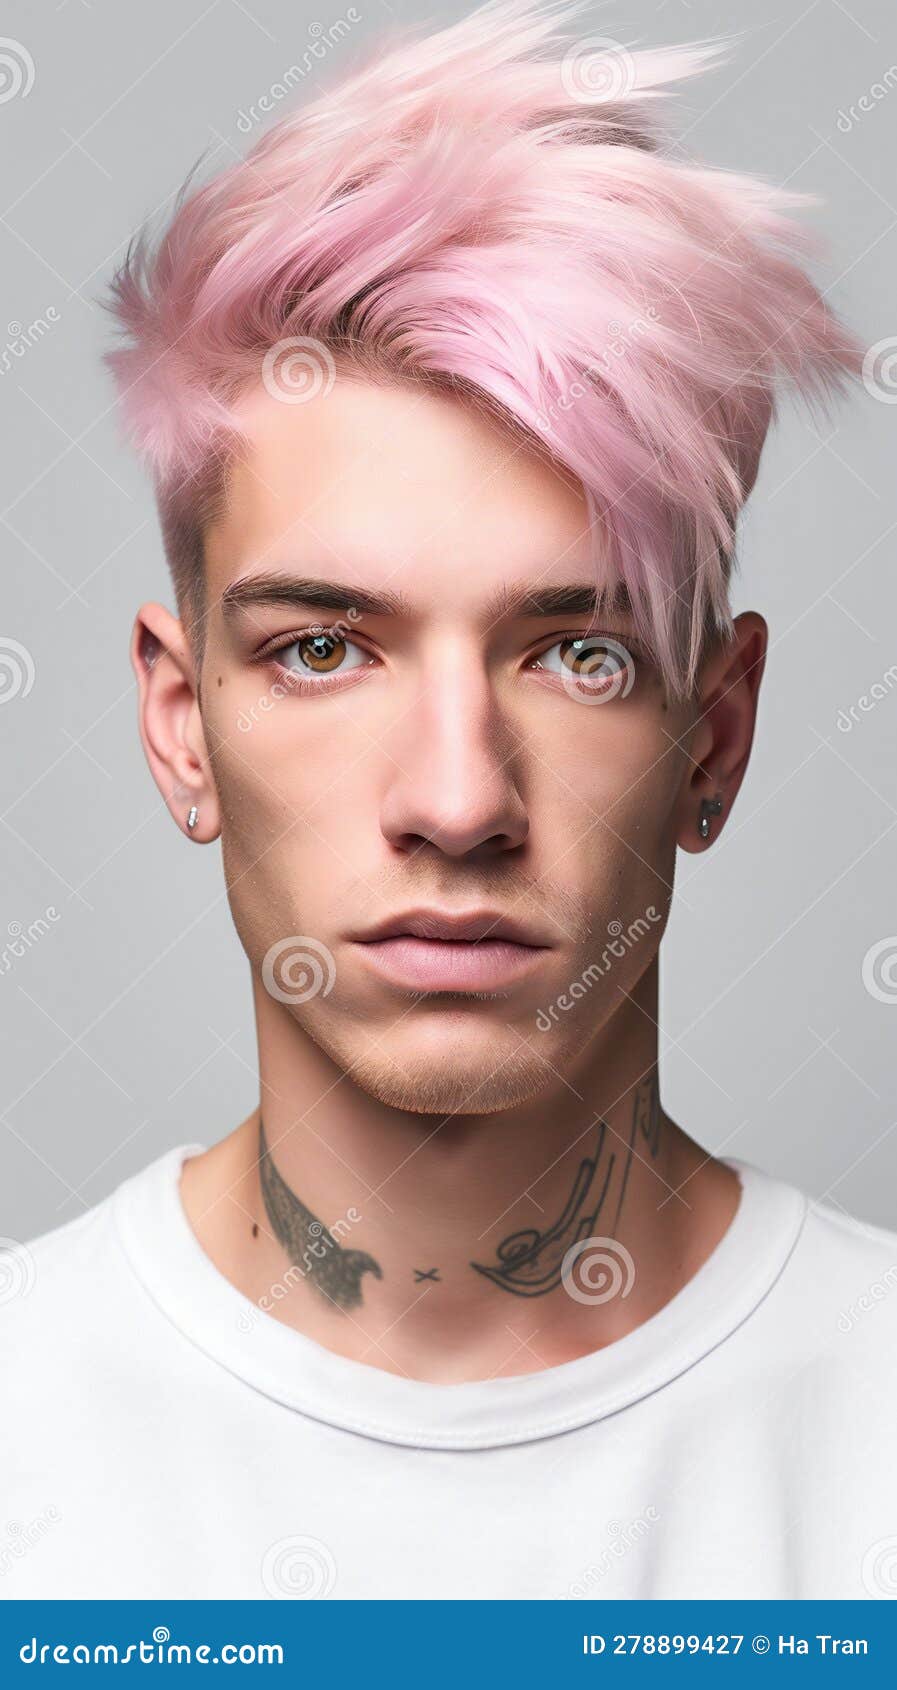 Short powder pink hairstyle for boys  Hairstyles  Hairphotocom   Hairstyles  Hairphotocom